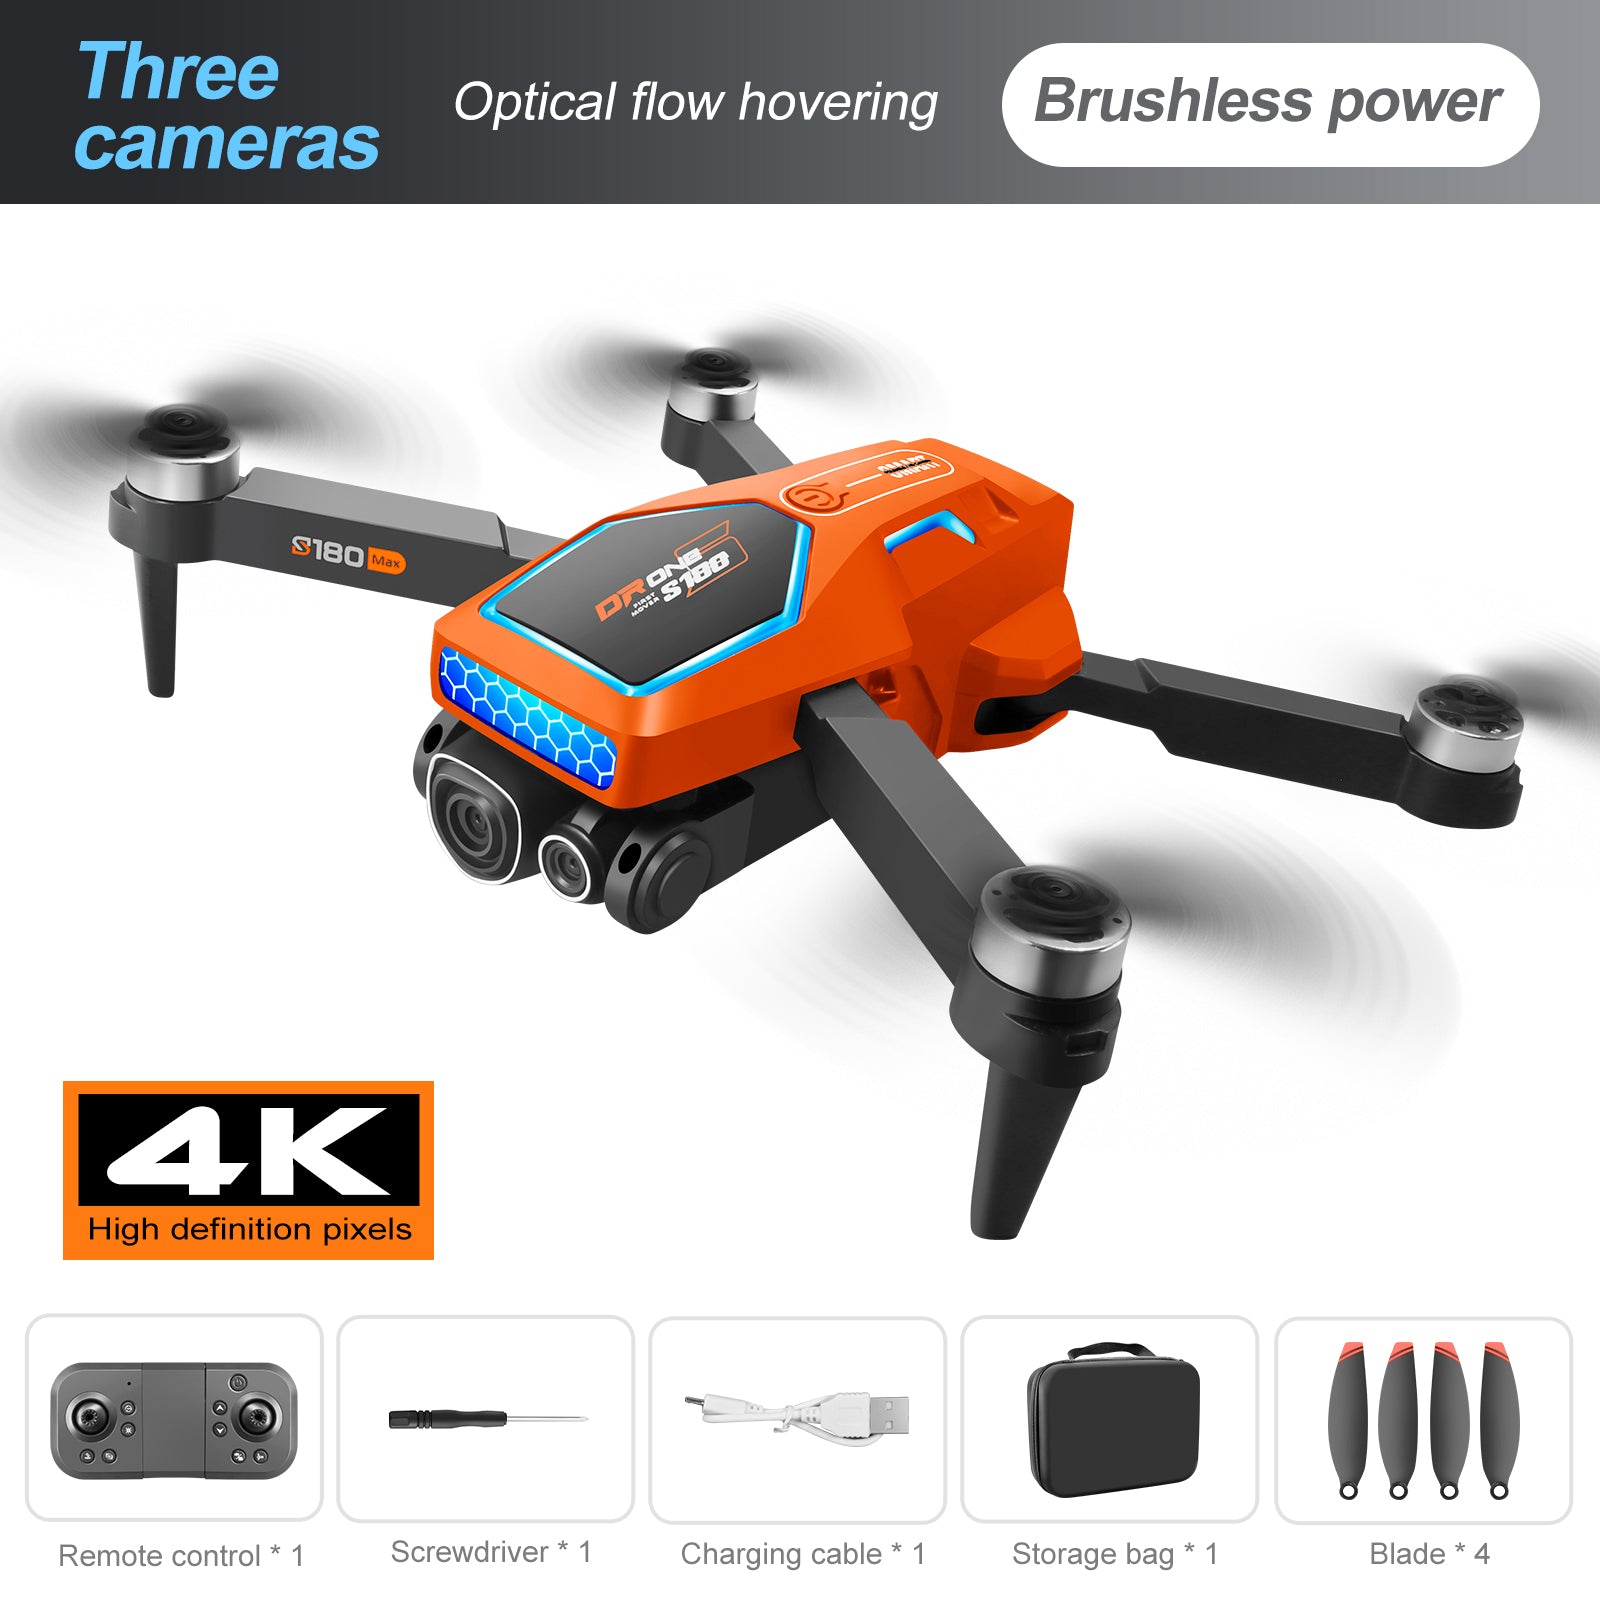 S180 Drone, Drone features: optical flow, brushless motors, 4K camera, remote control, and accessories like screwdriver and carrying case.